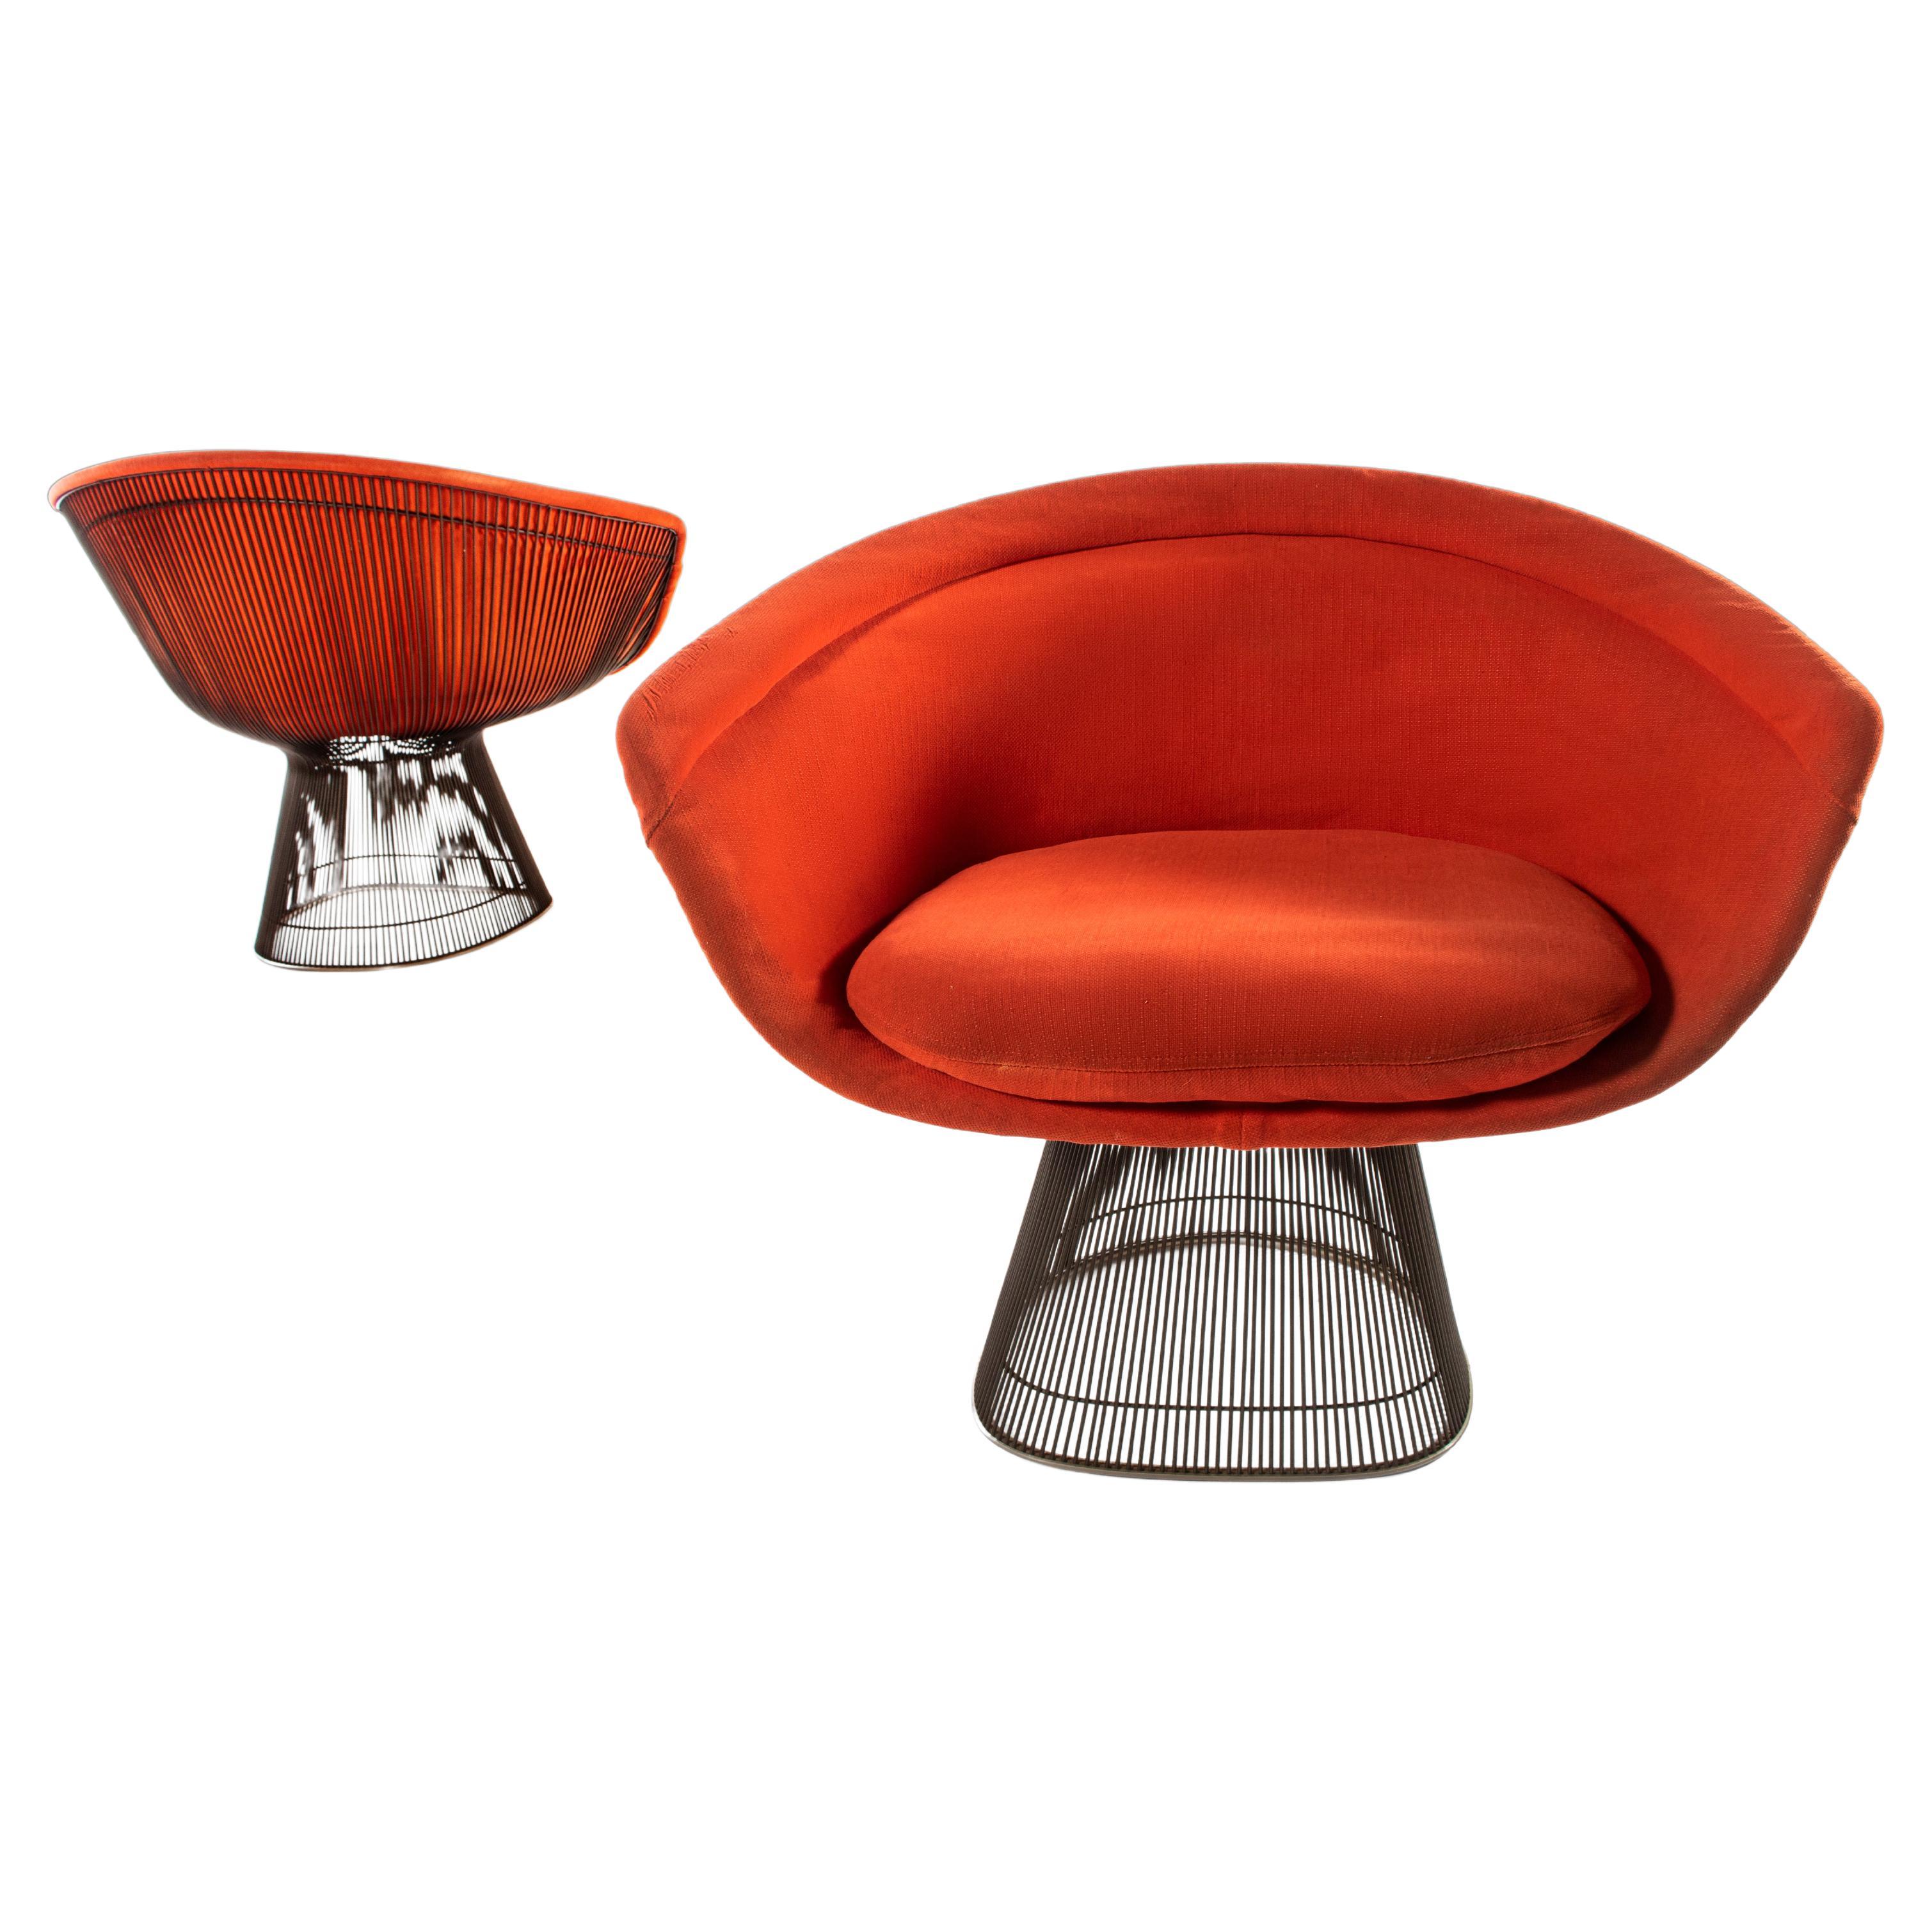 Set of 2 Lounge Chairs by Warren Platner for Knoll in Original Fabric, c. 1966 For Sale